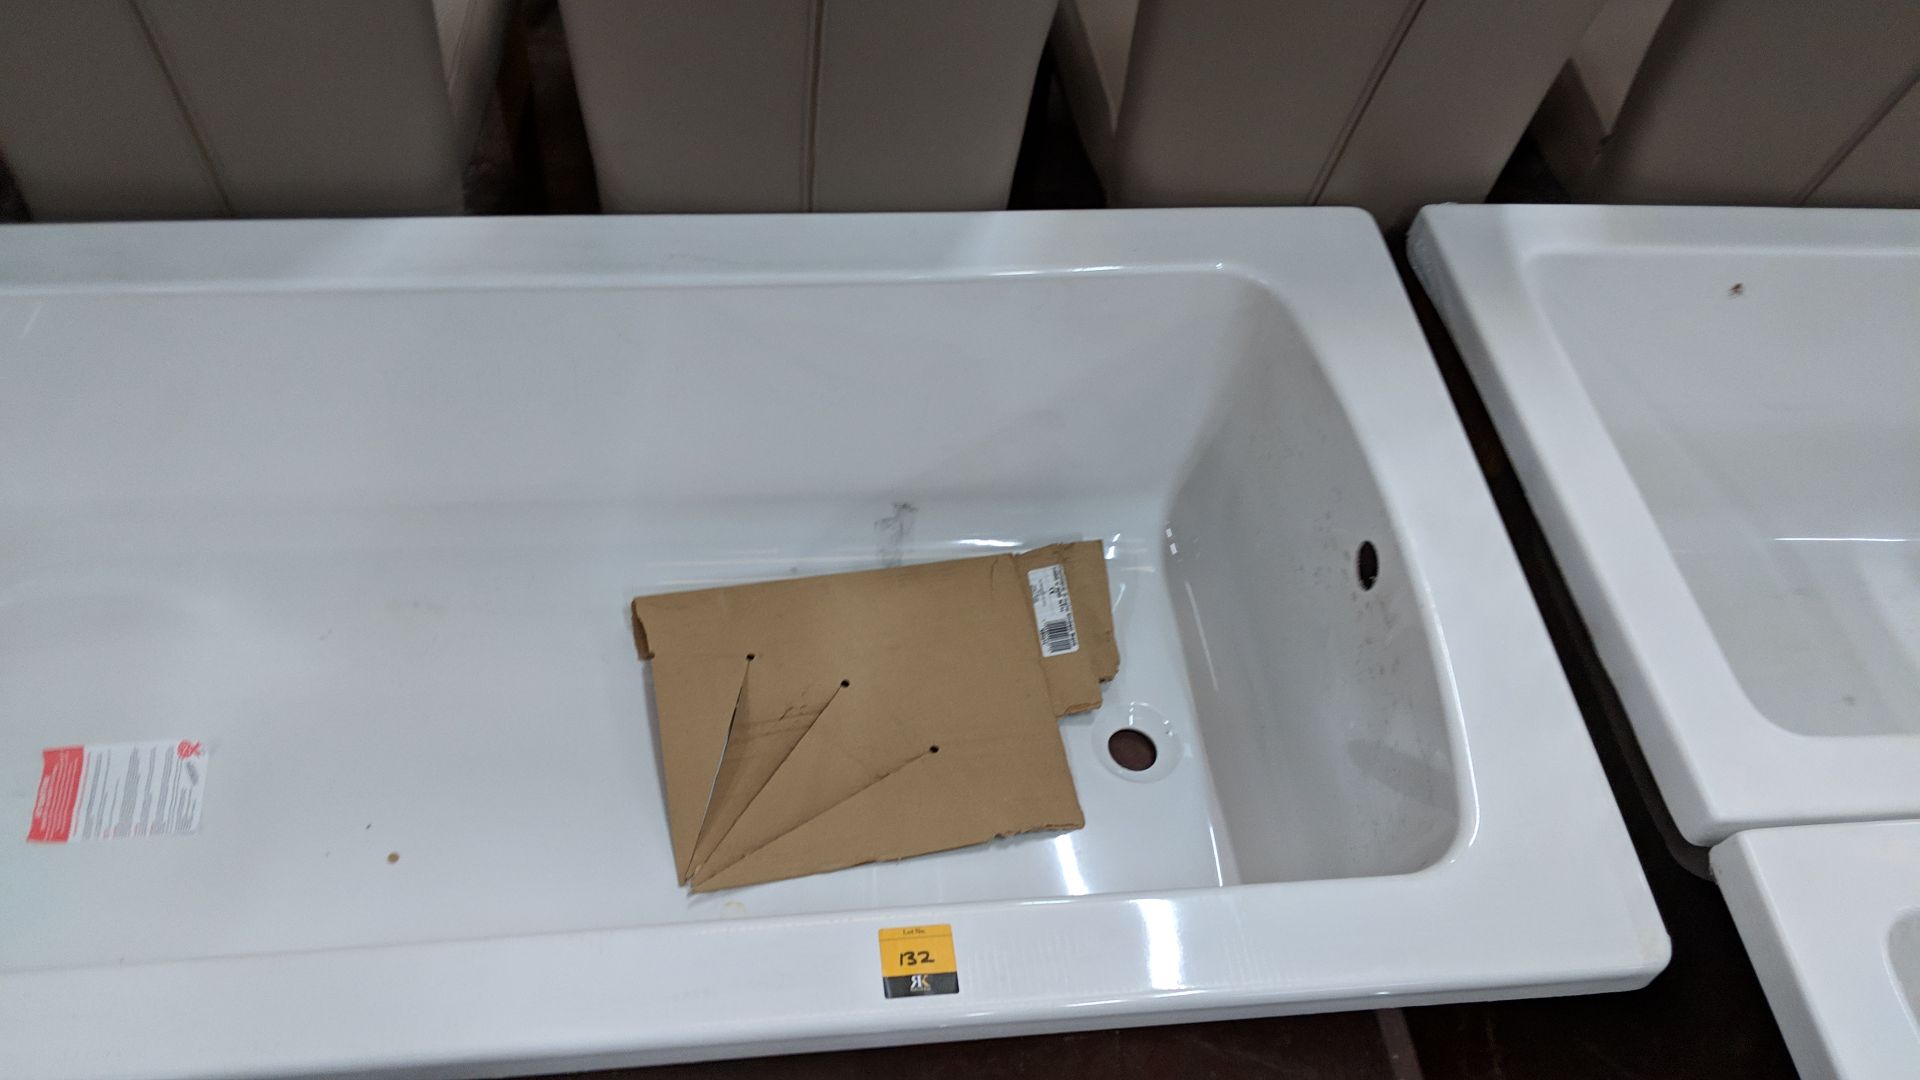 Standard single ended bath 1800x800mm NB. No legs Lots 100 - 142 & 146 - 167 are being sold on - Bild 3 aus 5